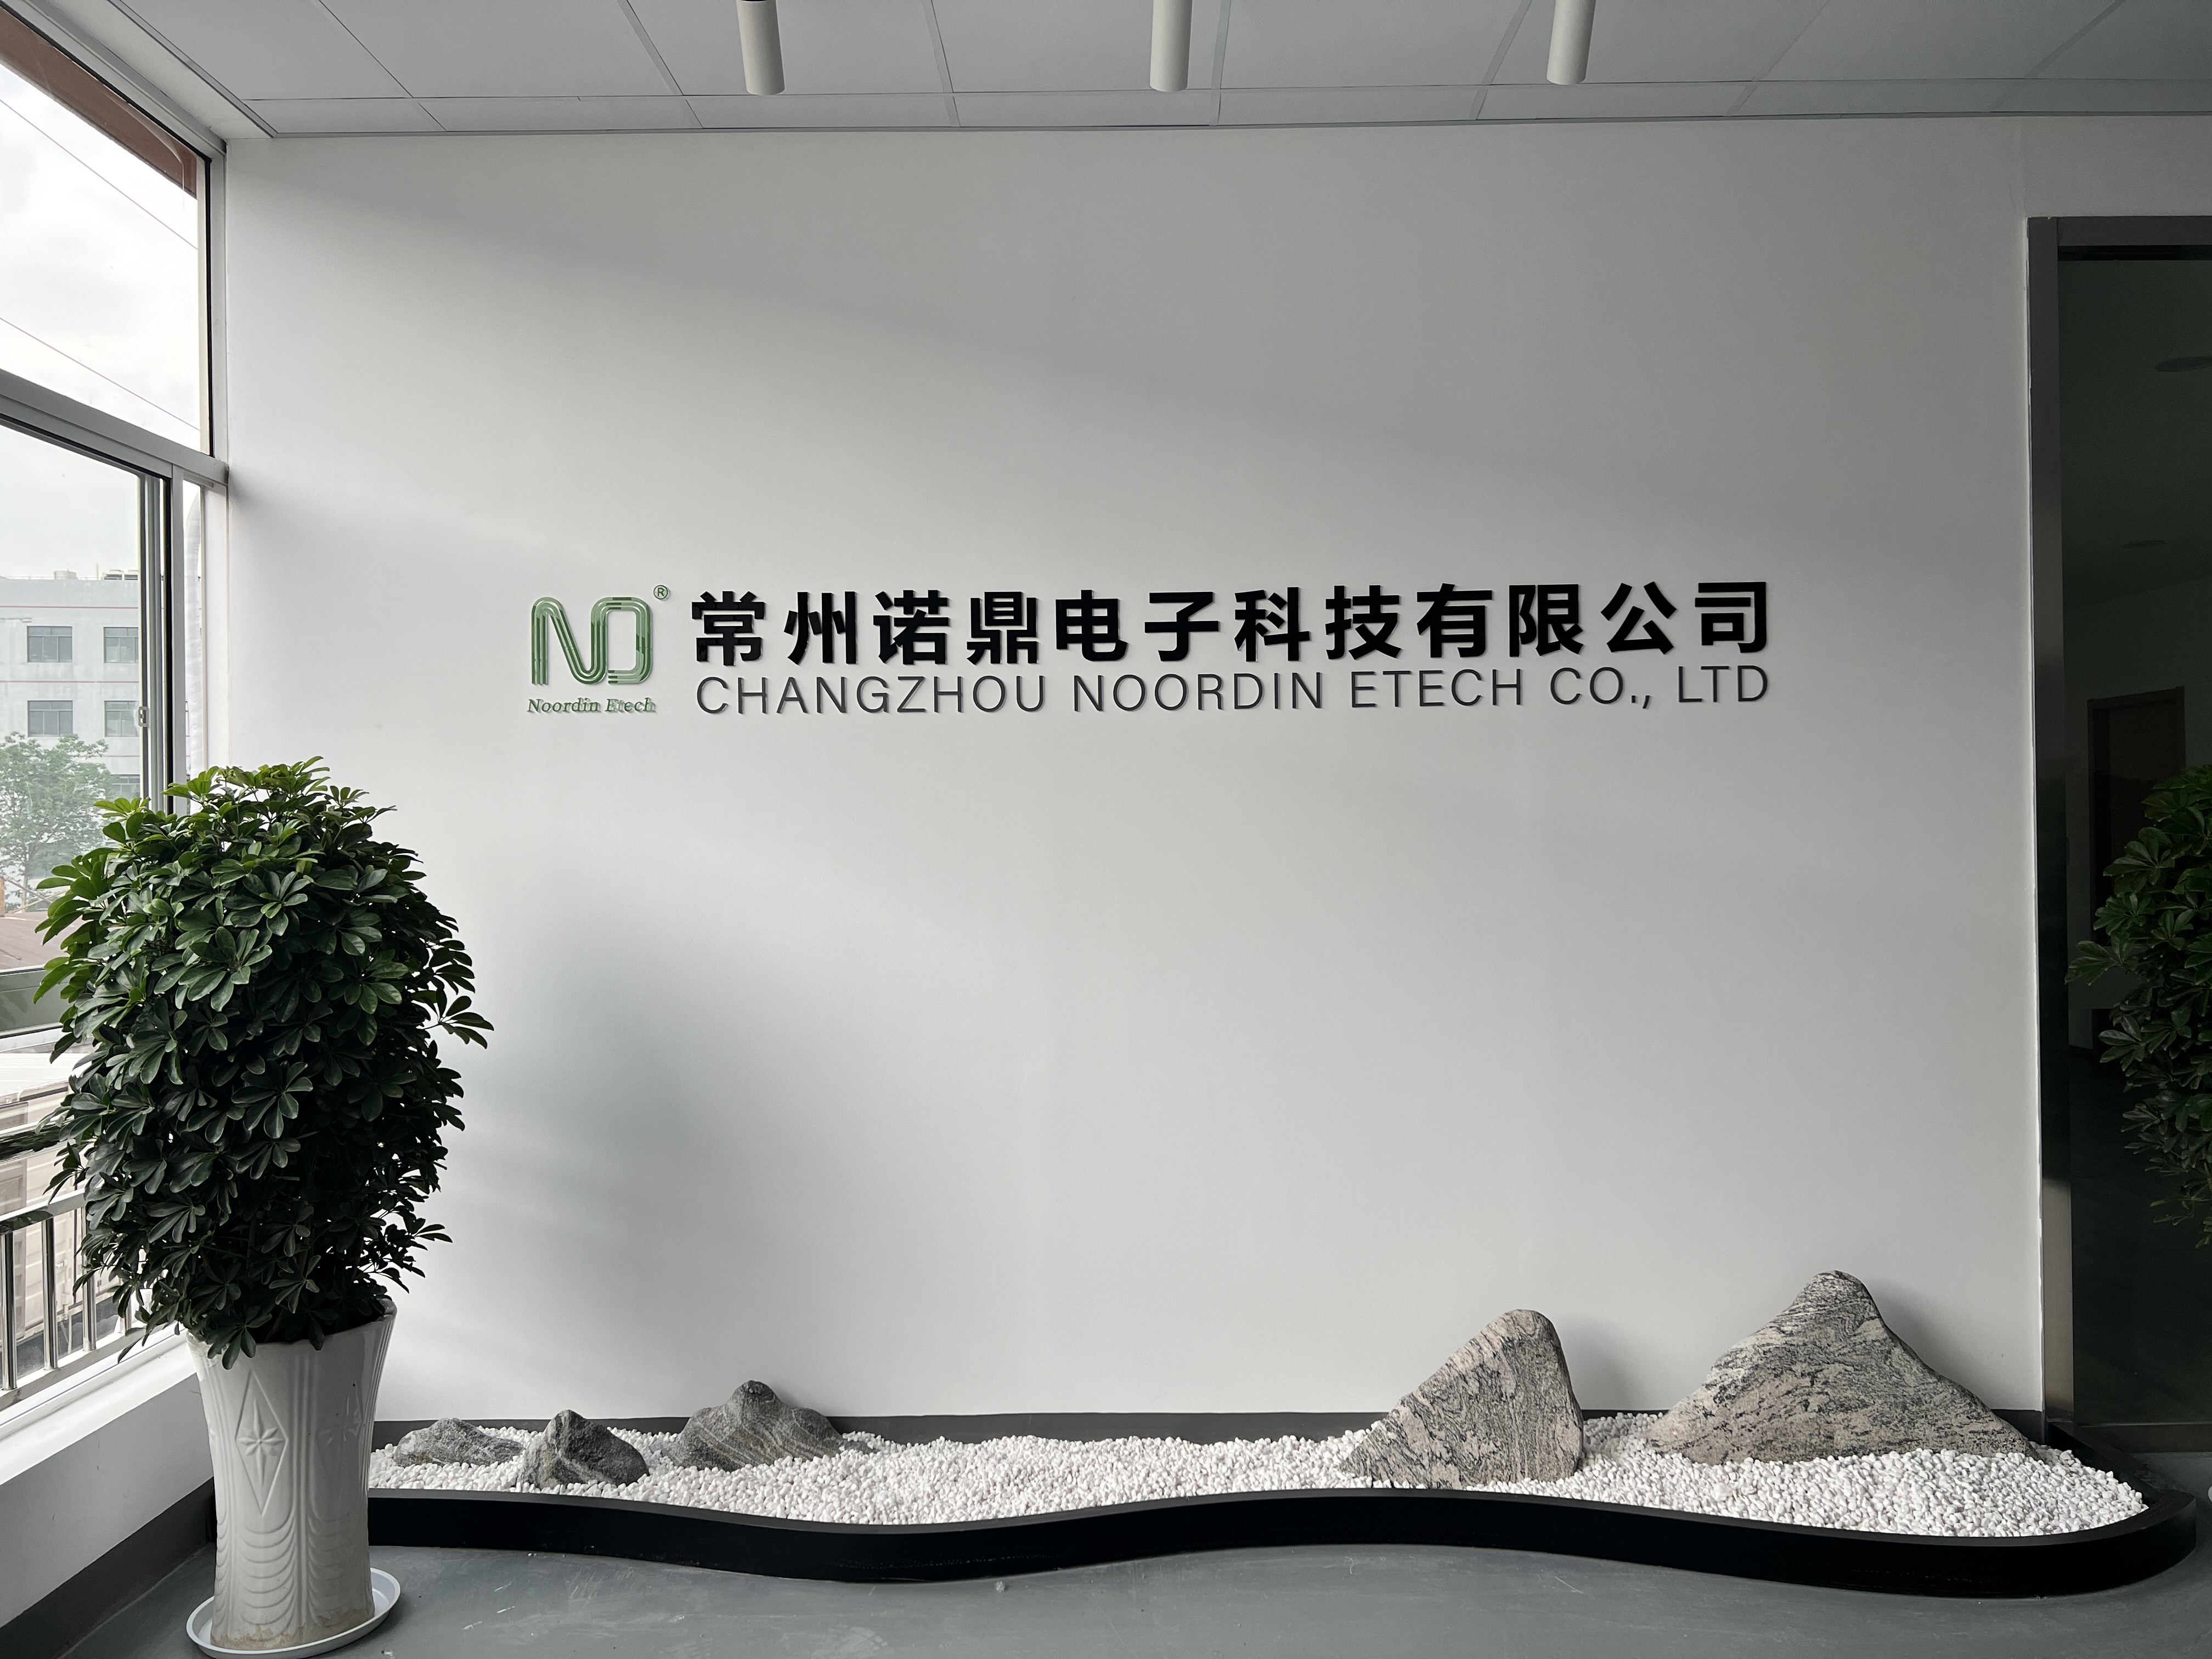 Changzhou Noordin Etech Co., Ltd Expands Operations, Enhancing Manufacturing Capabilities and R&D